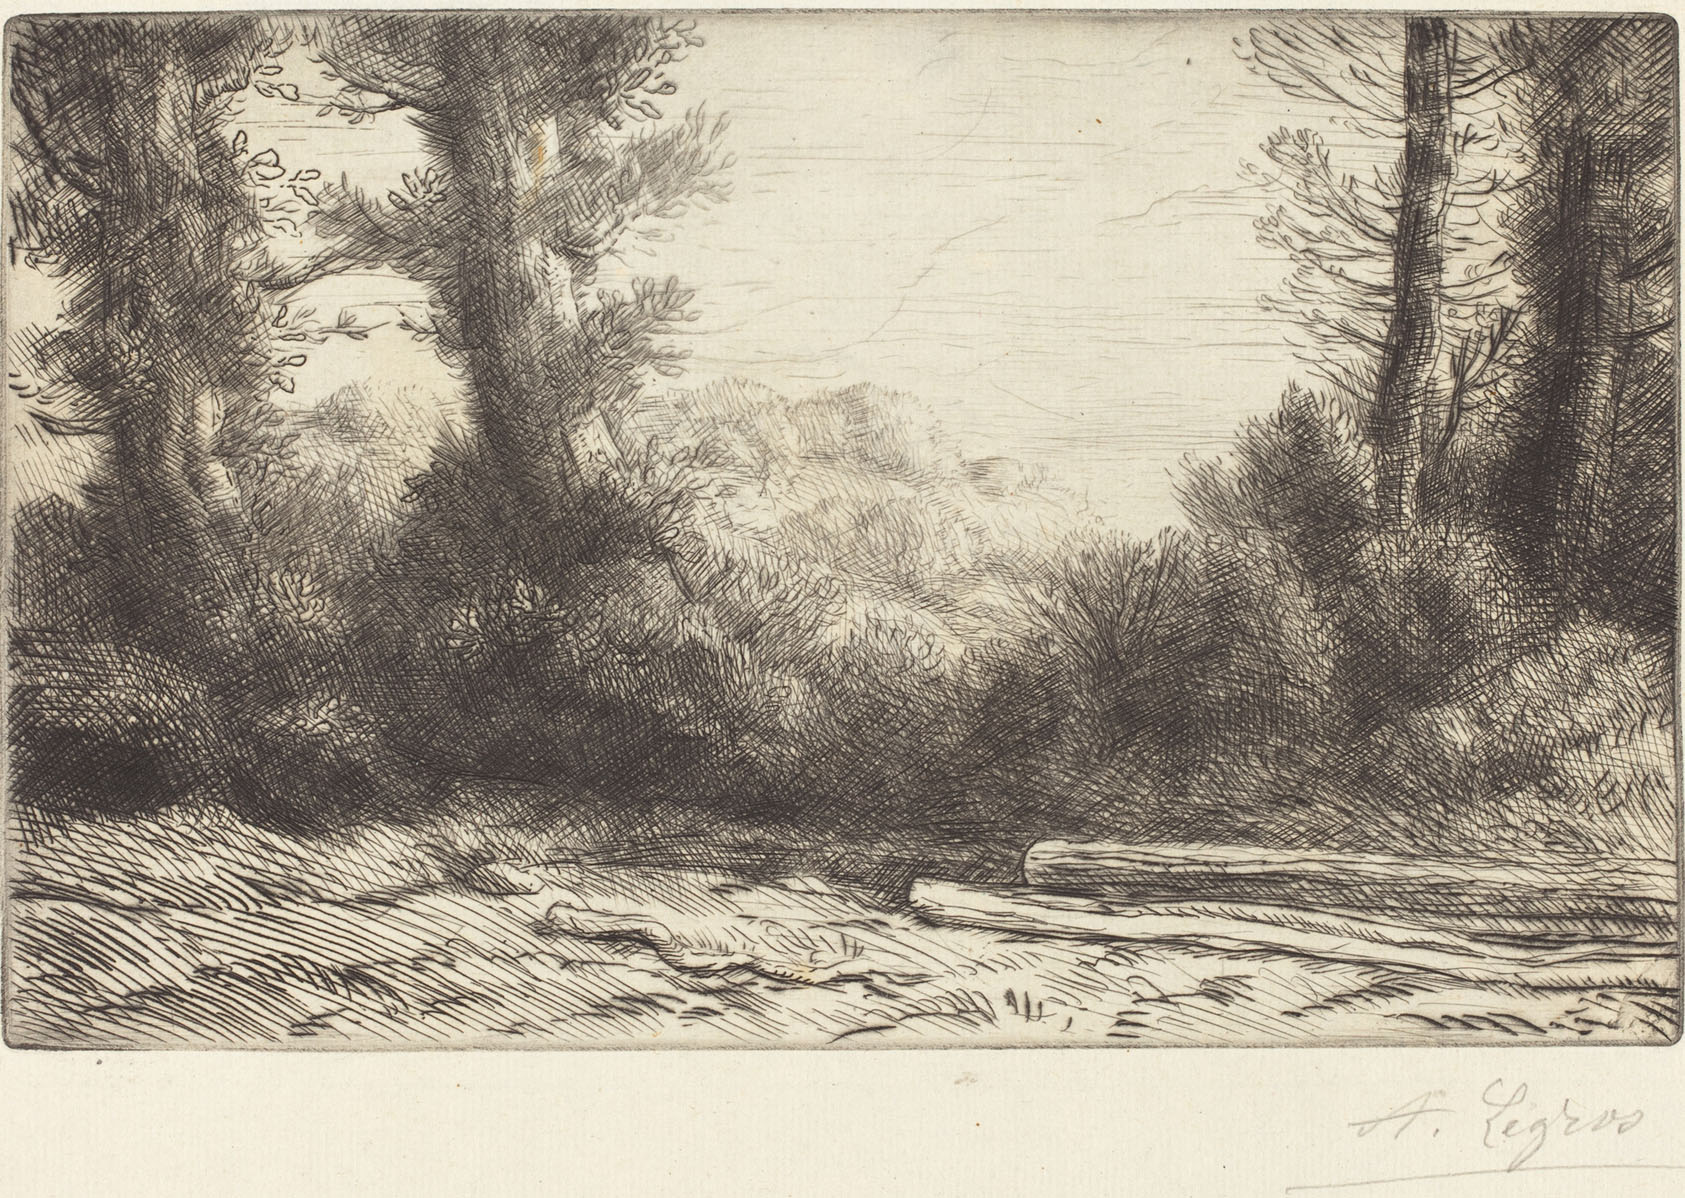 Alphonse Legros, Edge of a Wood (Lisiere de bois), French, 1837 - 1911, , etching and drypoint, Gift of George Matthew Adams in memory of his mother, Lydia Havens Adams